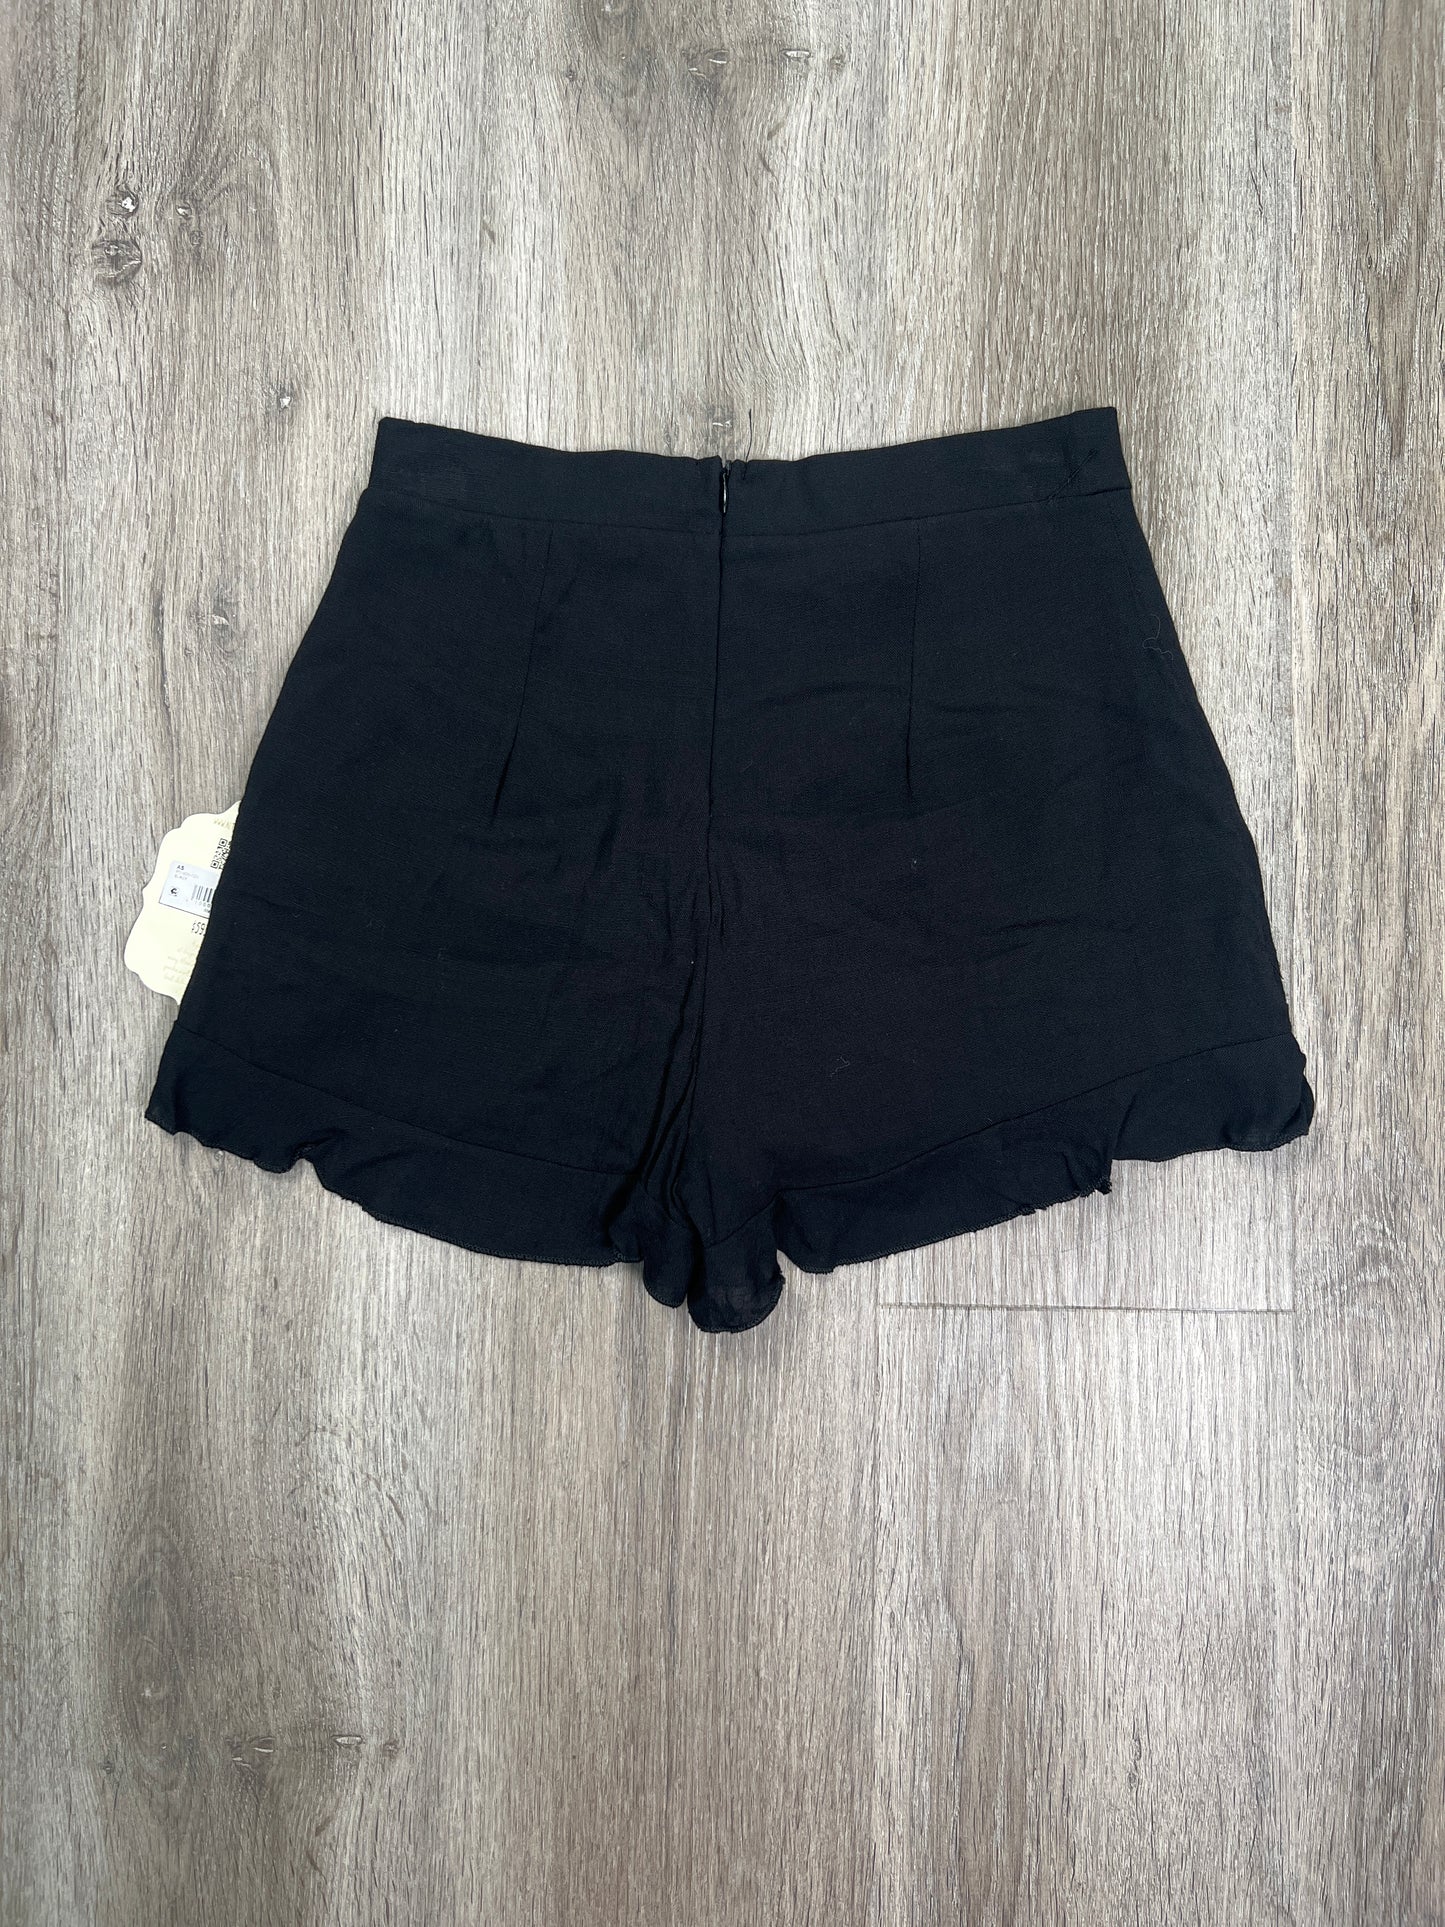 Skirt Mini & Short By Altard State  Size: Xs